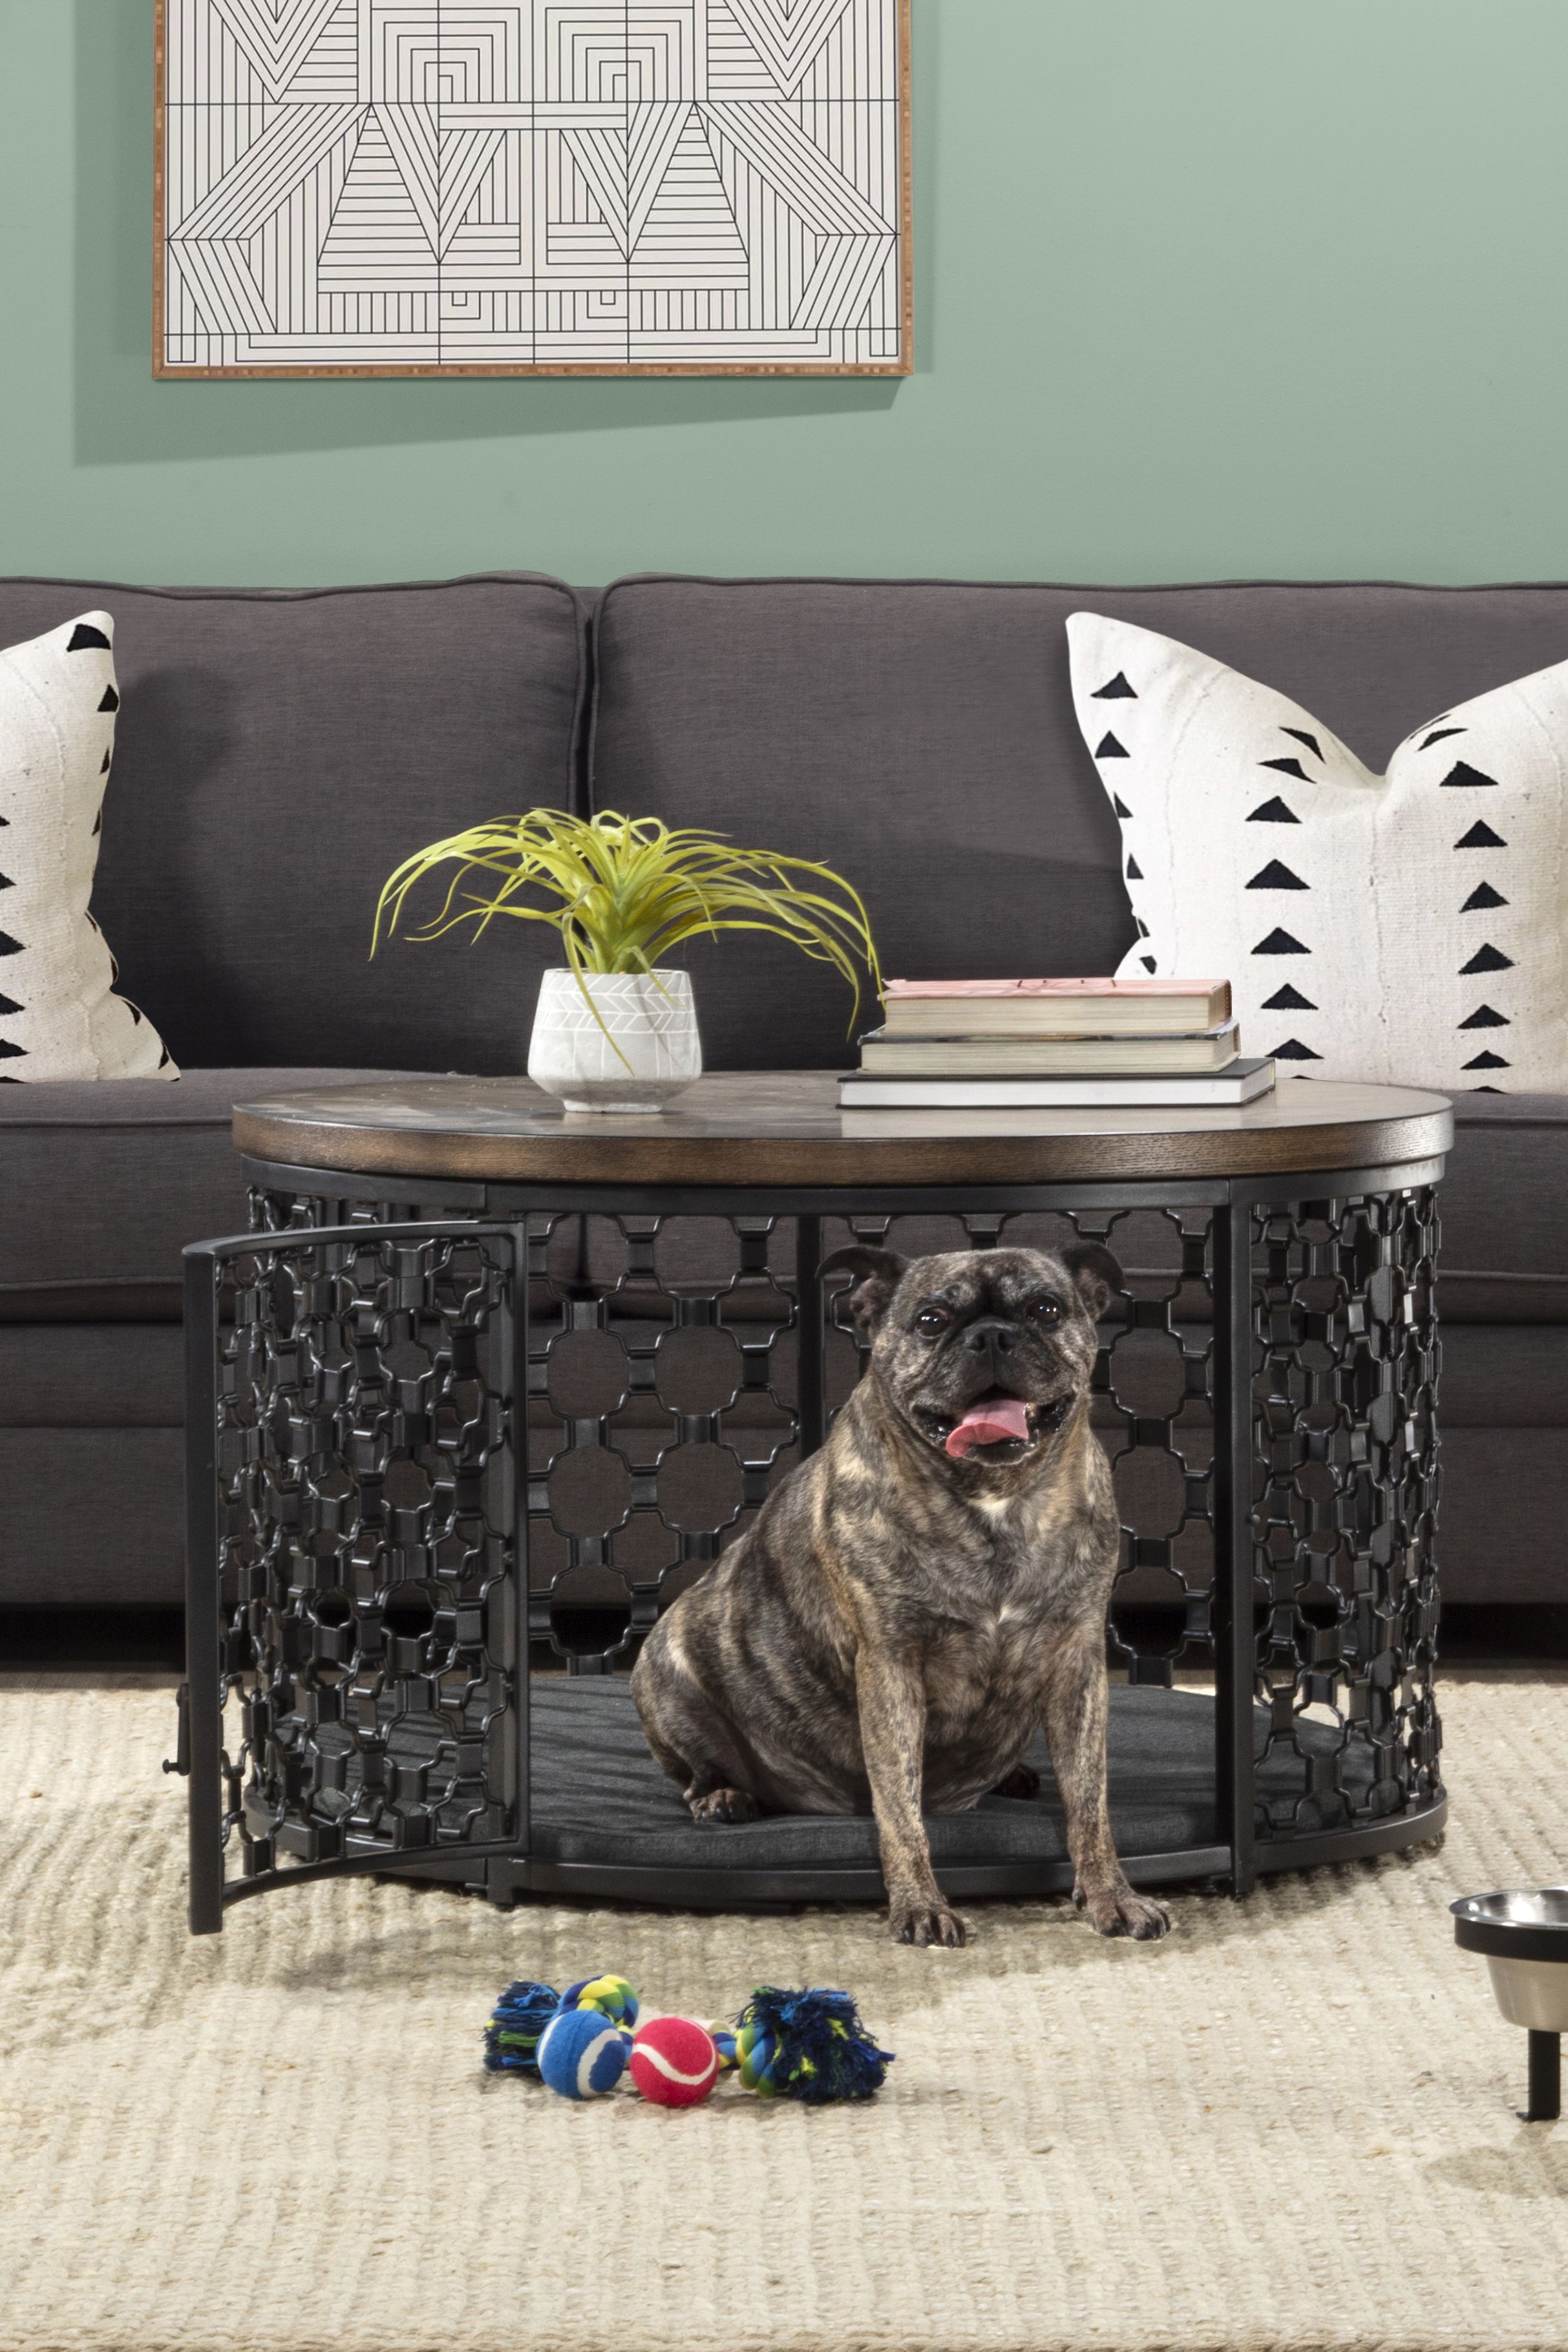 Home Decor For Pet Owners: Keeping It Stylish And Functional